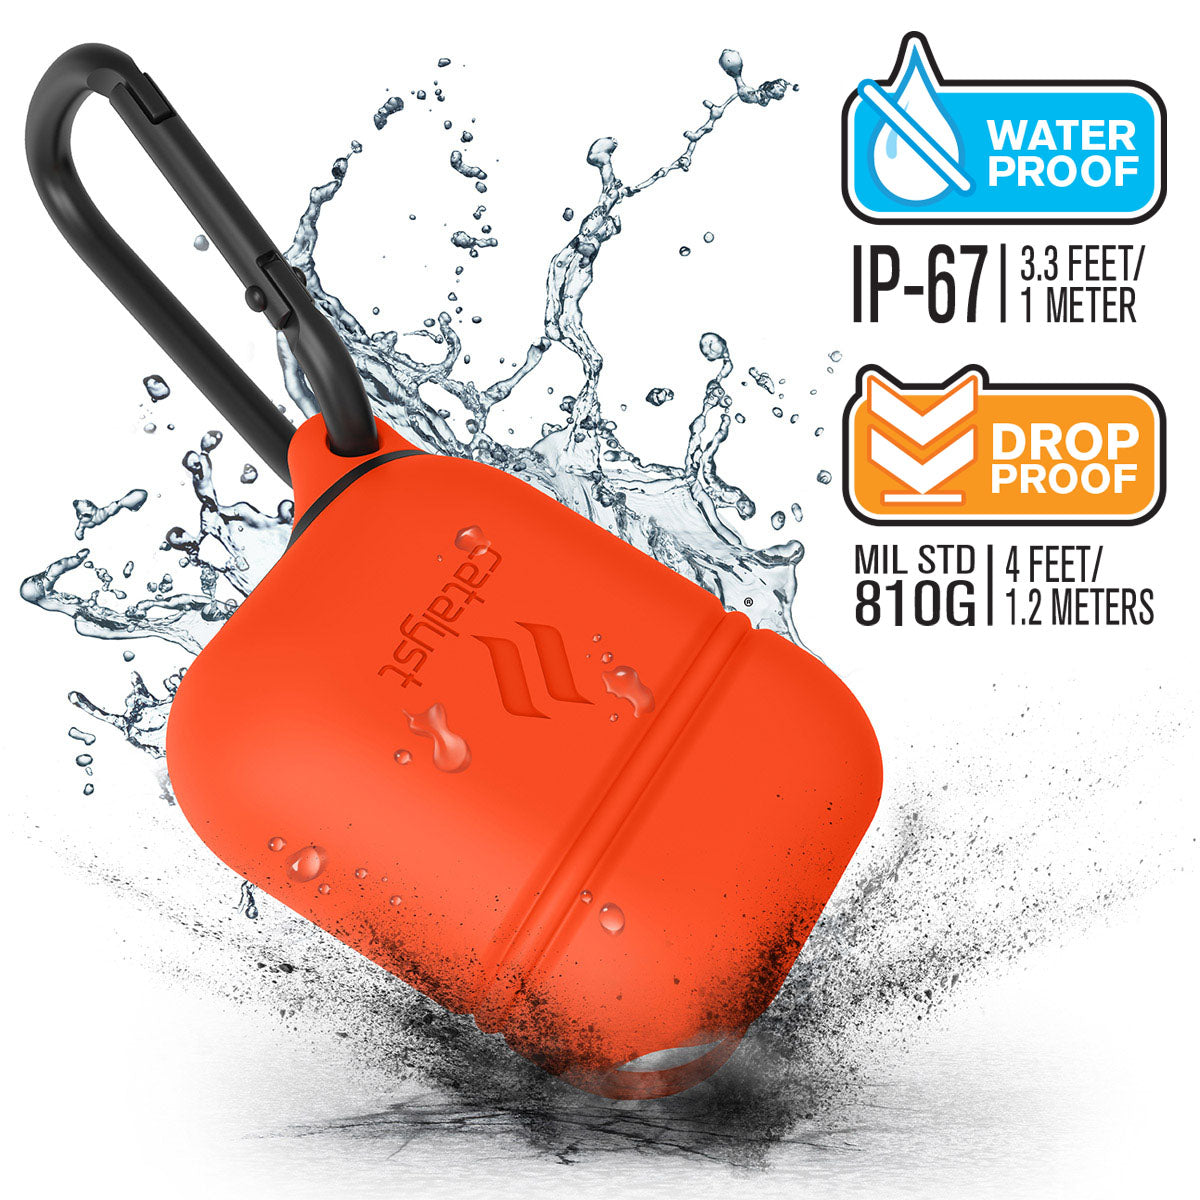 CATAPDSUN | Catalyst airpods gen2/1 waterproof case + carabiner showing the case drop proof and water proof features with attached carabiner in sunset text reads water proof IP-67 3.3 FEET/1 METER DROP PROOF MIL STD 810G 1.2 METERS